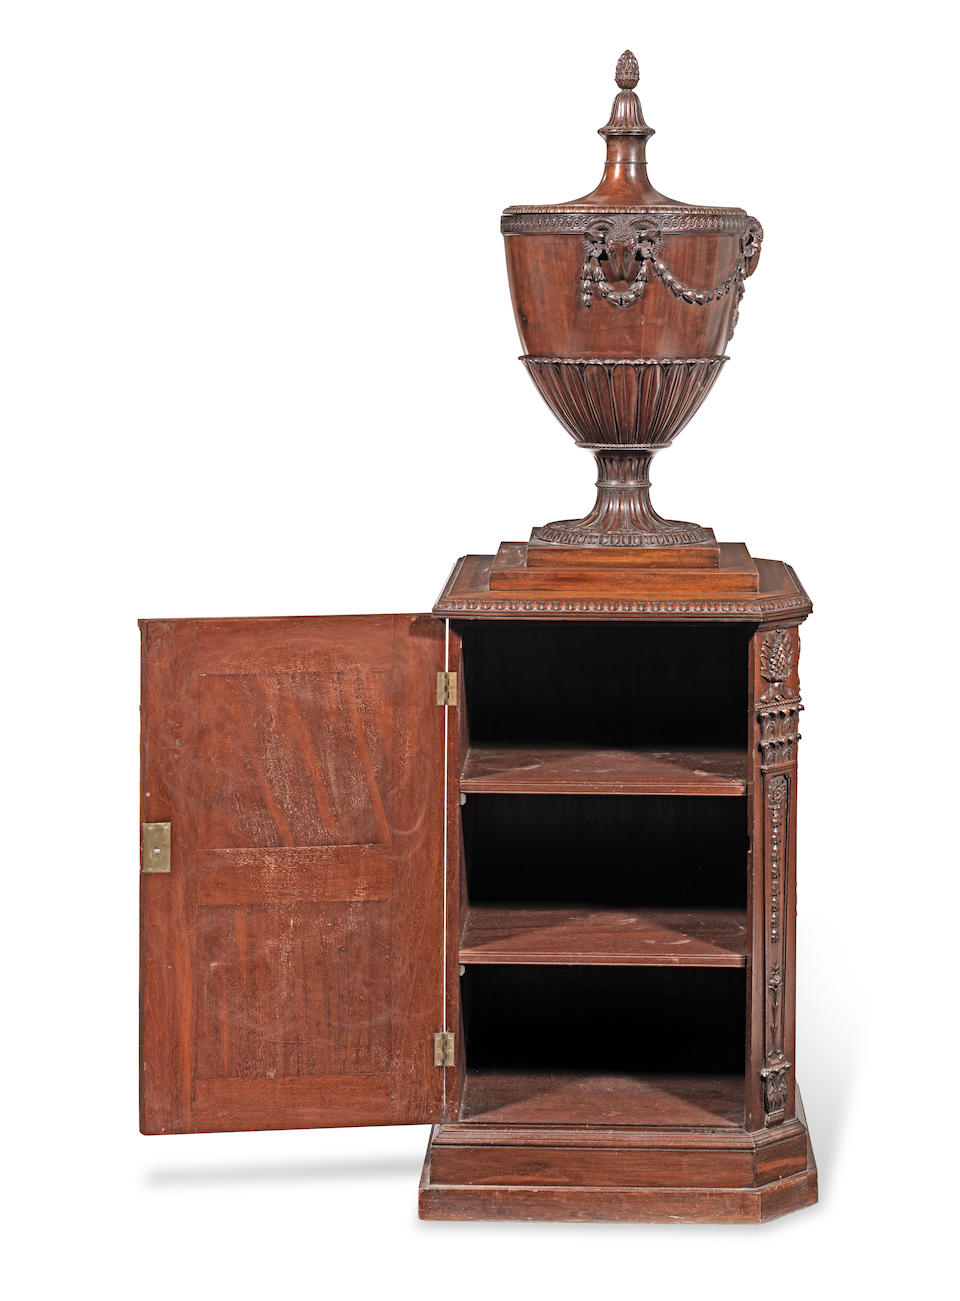 A matched pair of satinwood and carved mahogany urns and pedestals one urn and pedestal circa 1775, the other of a later date but probably 19th century (2)